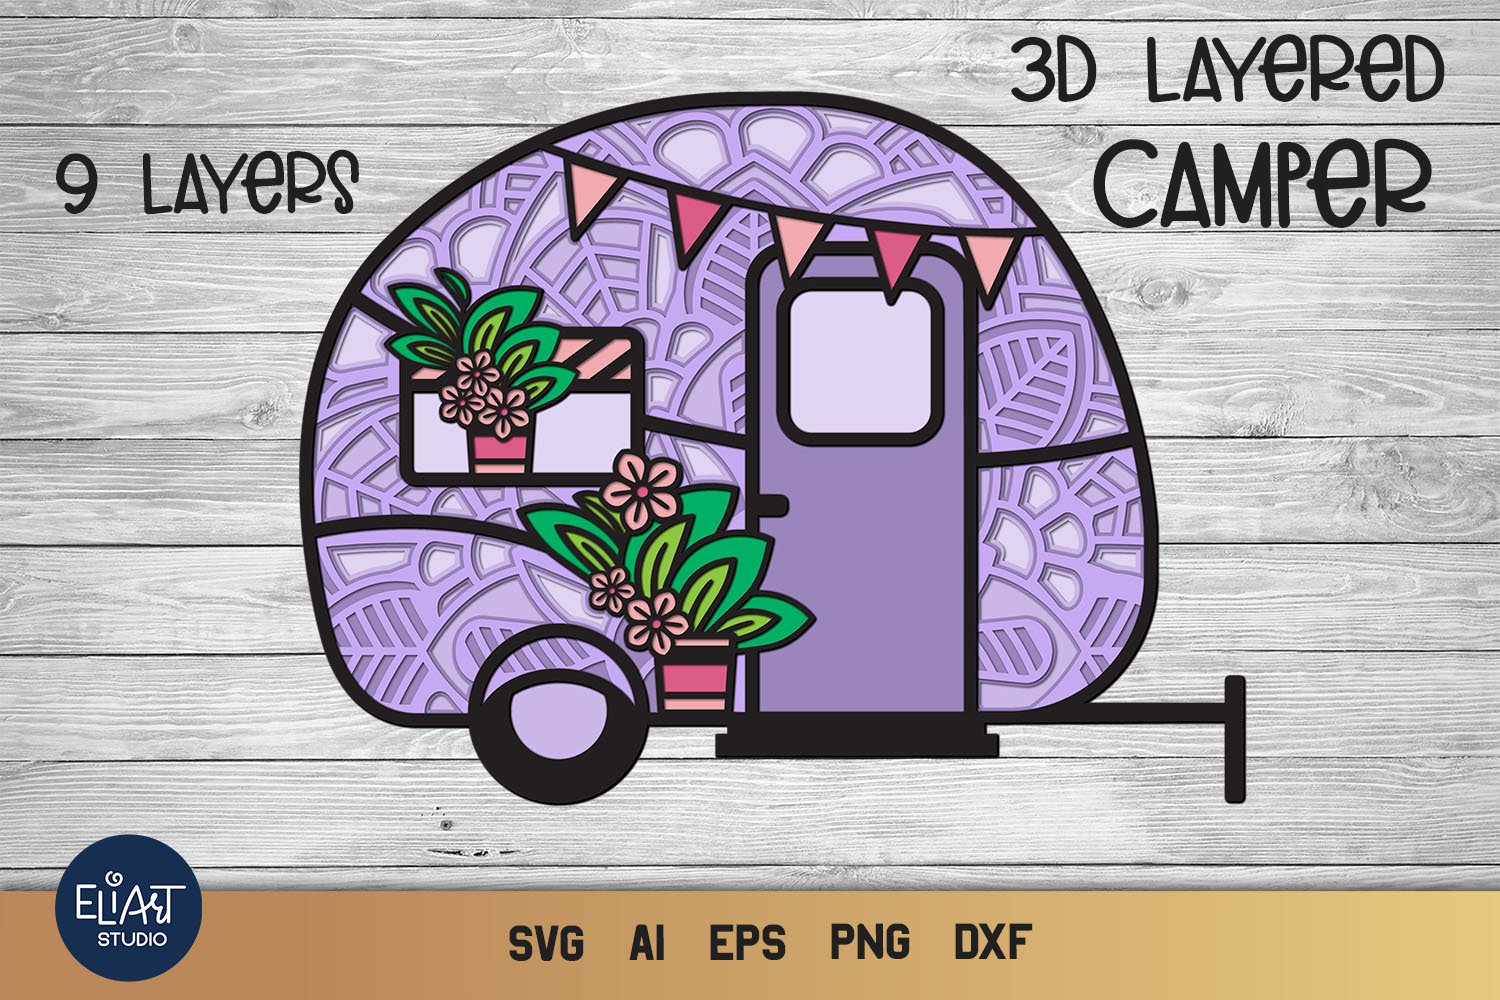 Cover image of 3D Layered SVG Camper.